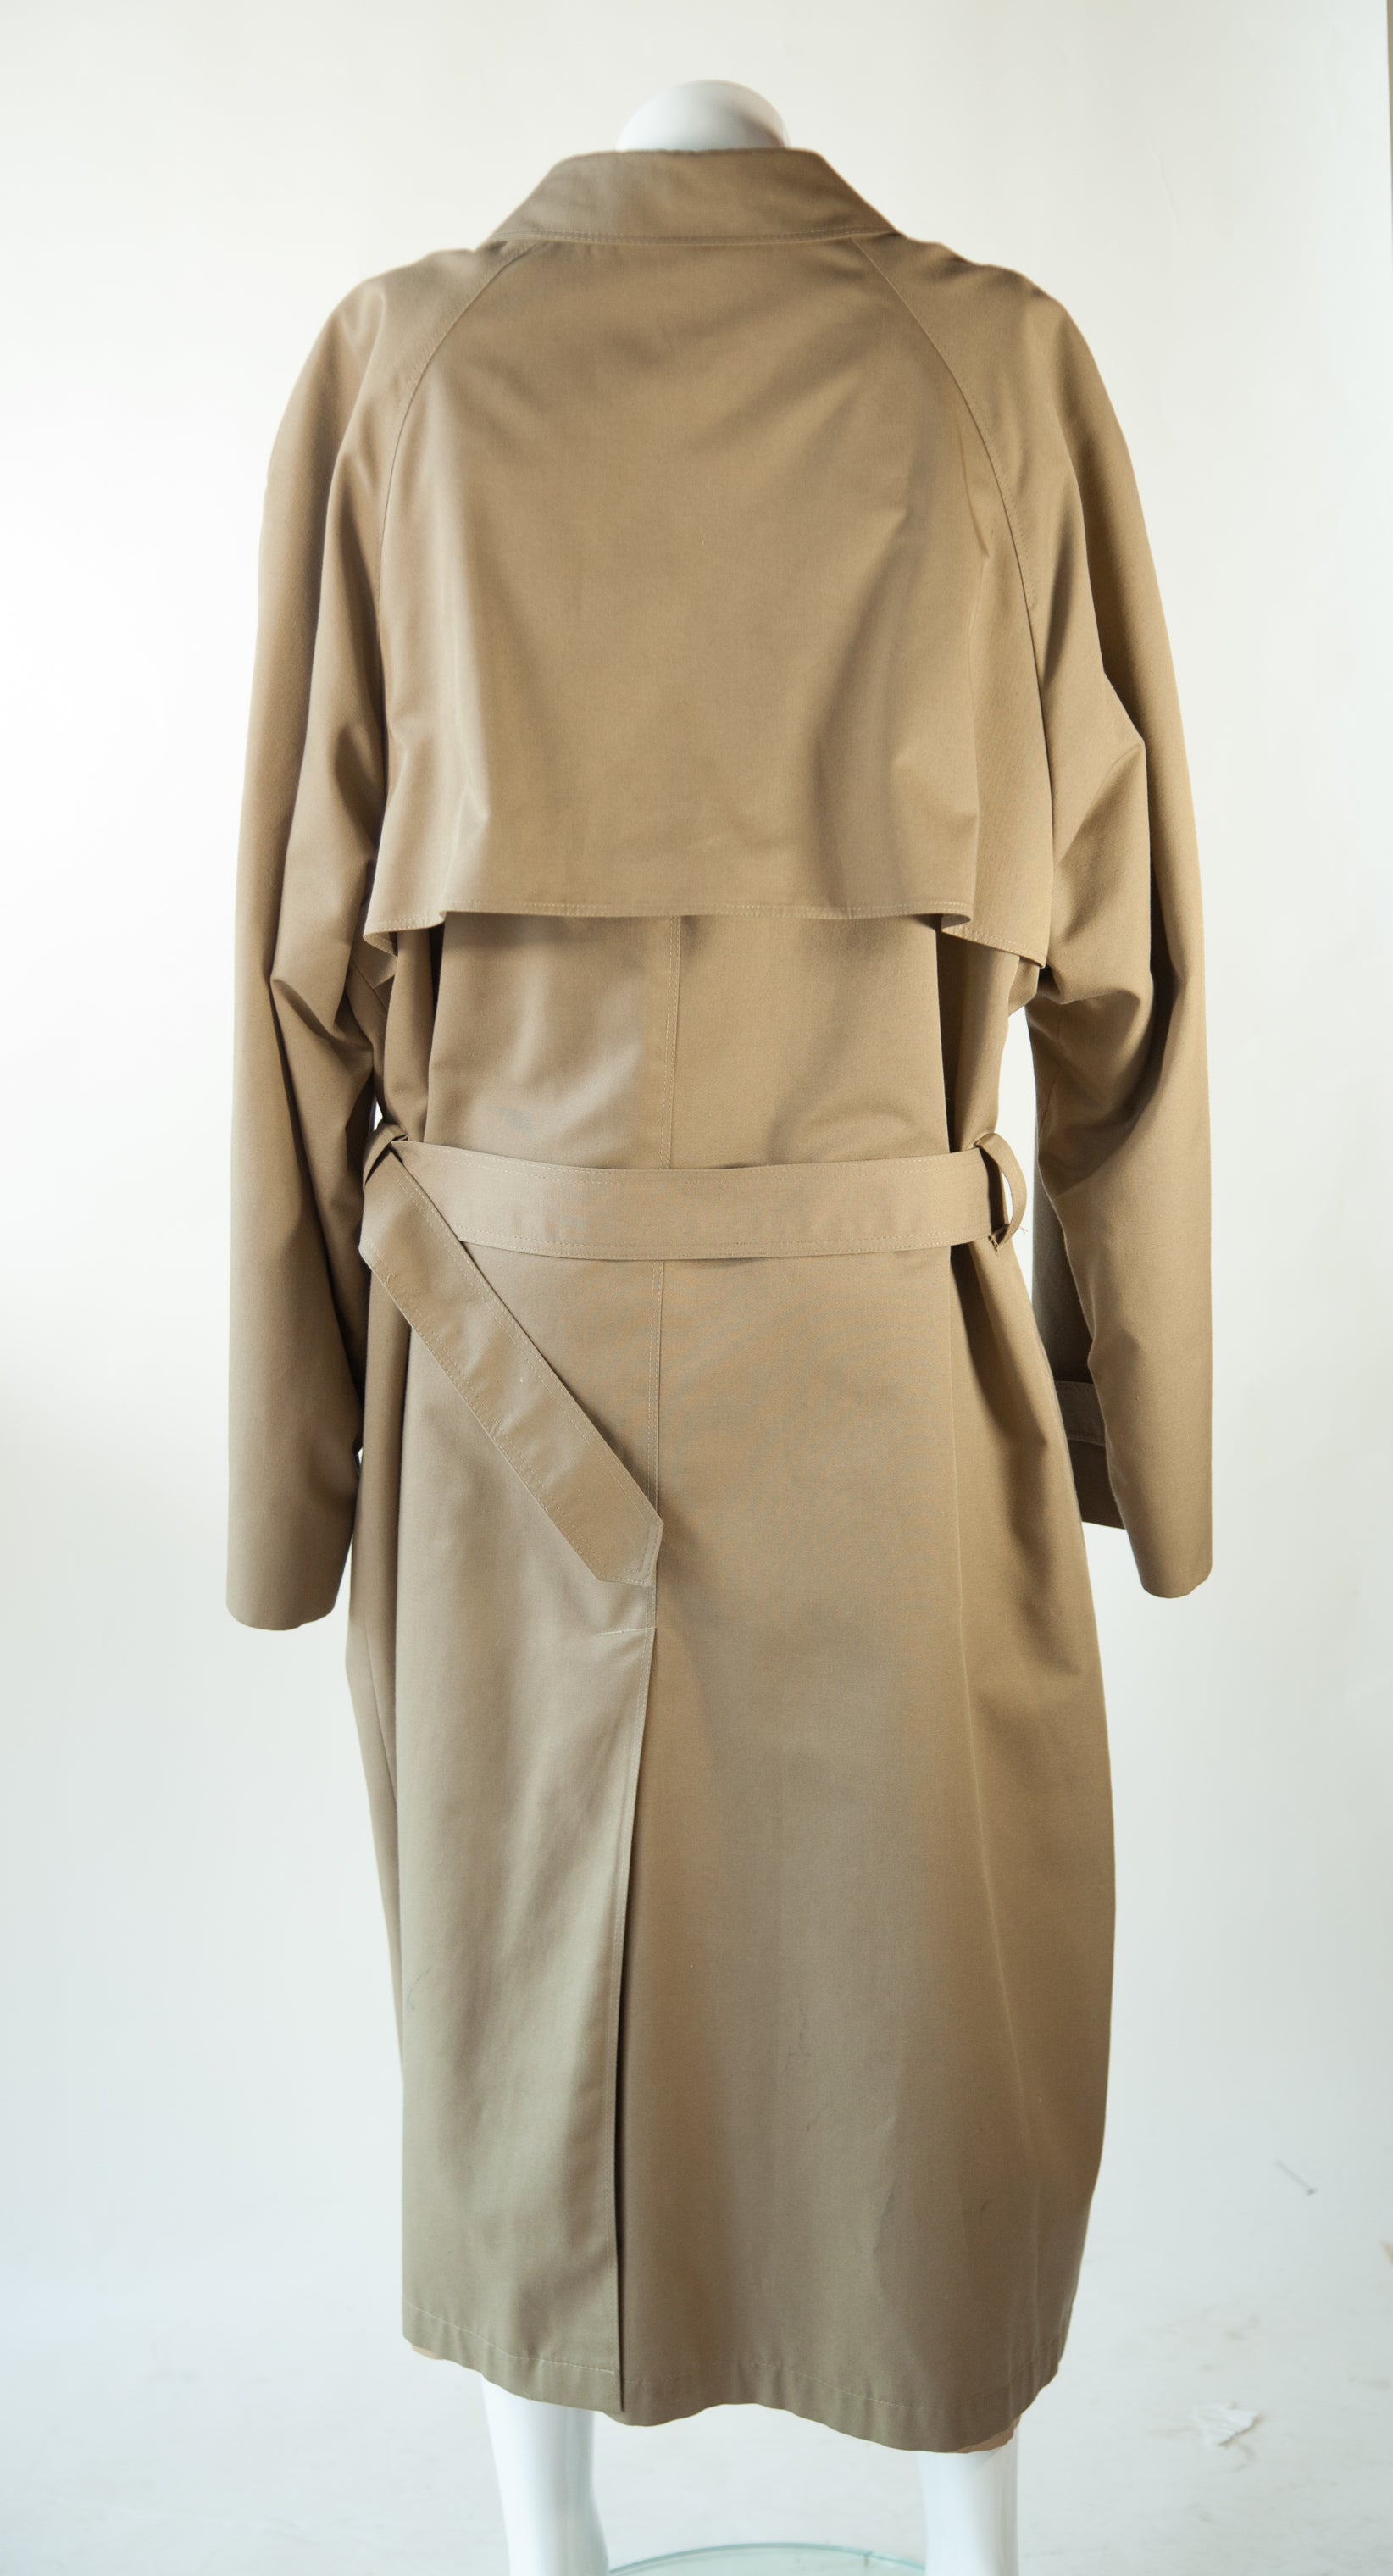 Christian Dior trench coat 